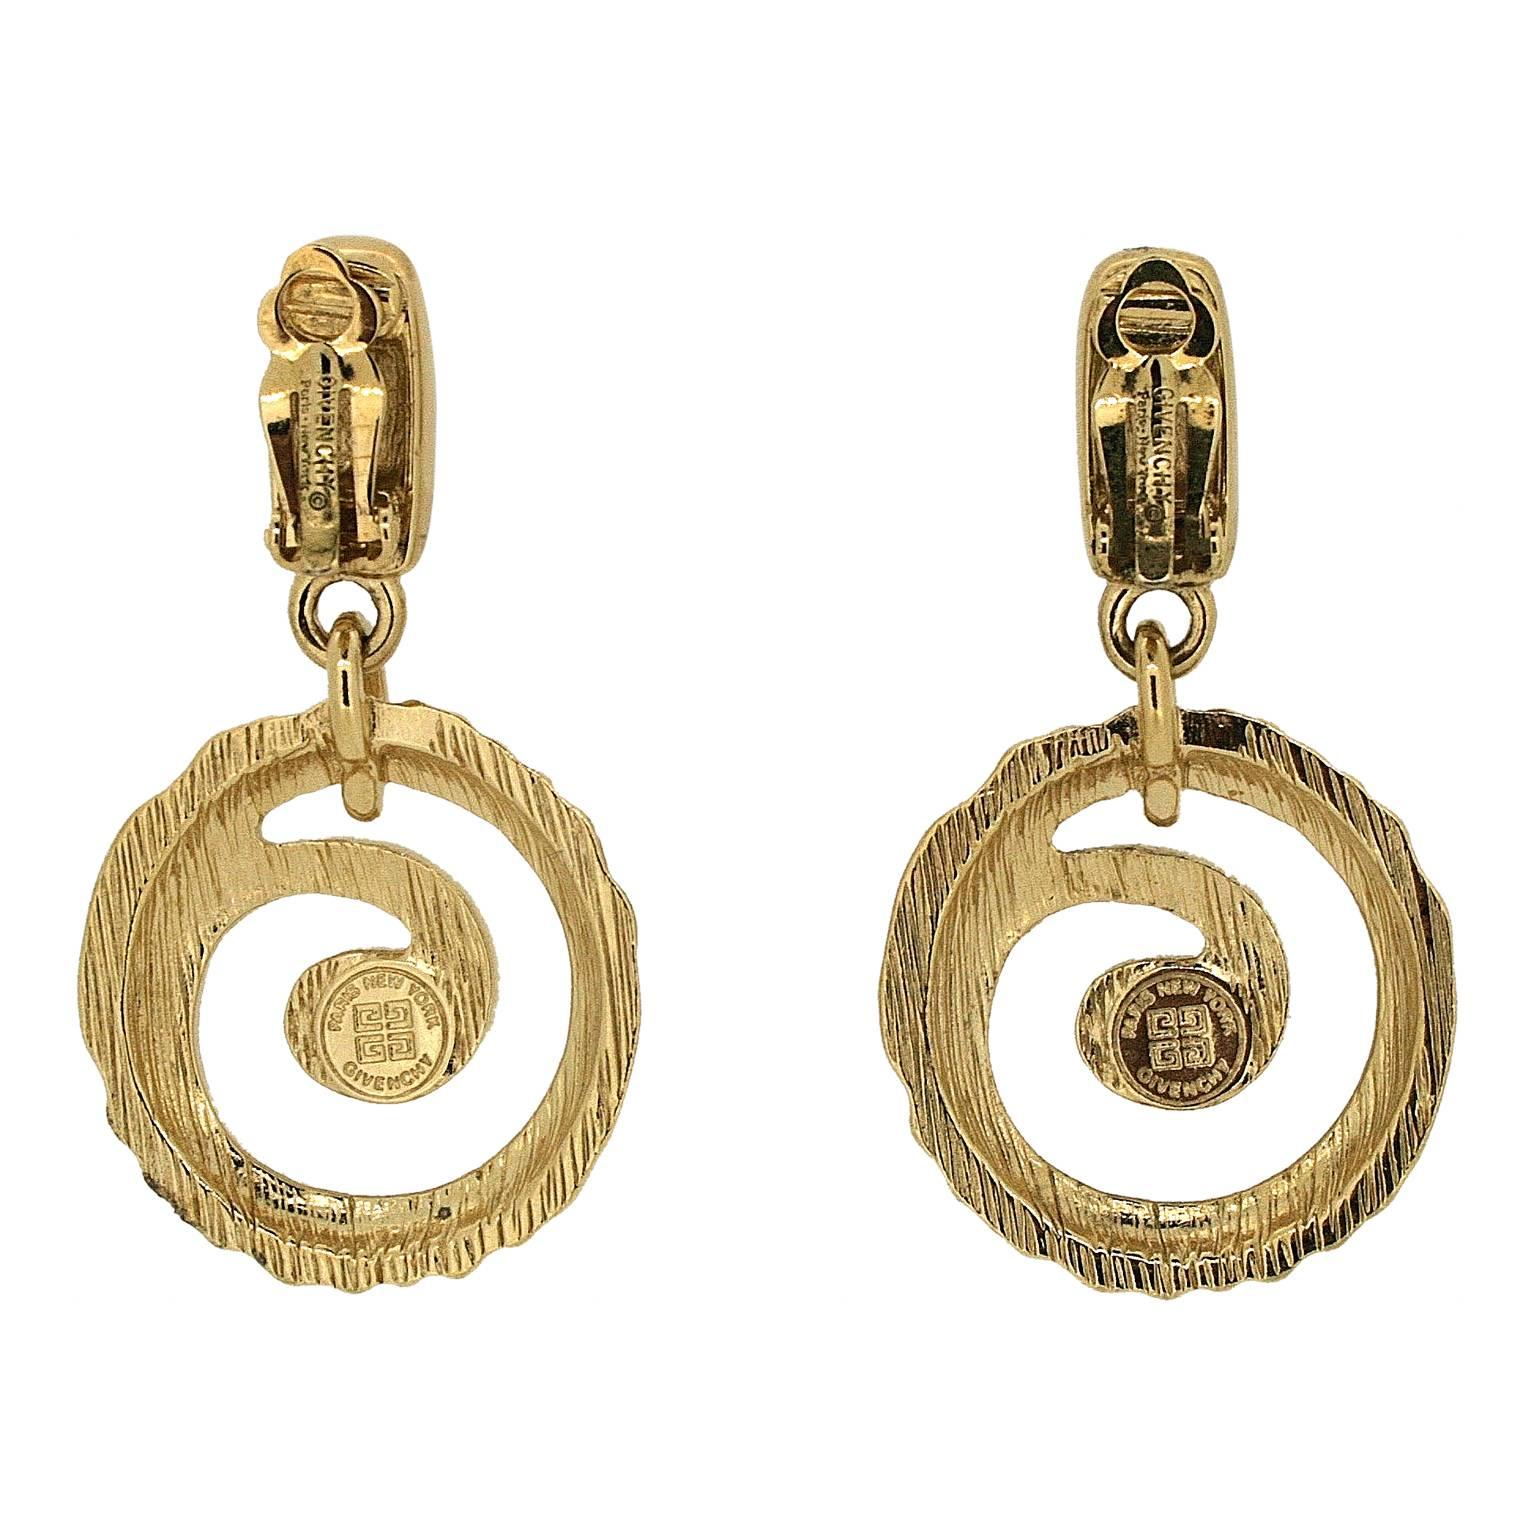 These glamorous drop earrings were made in the 1980s by Givenchy.
Condition Report:
Excellent 
The Details...
These shiny gold tone earrings feature a rectangular shape, suspended from which is a hammered metal circle with a swirling design cut out.